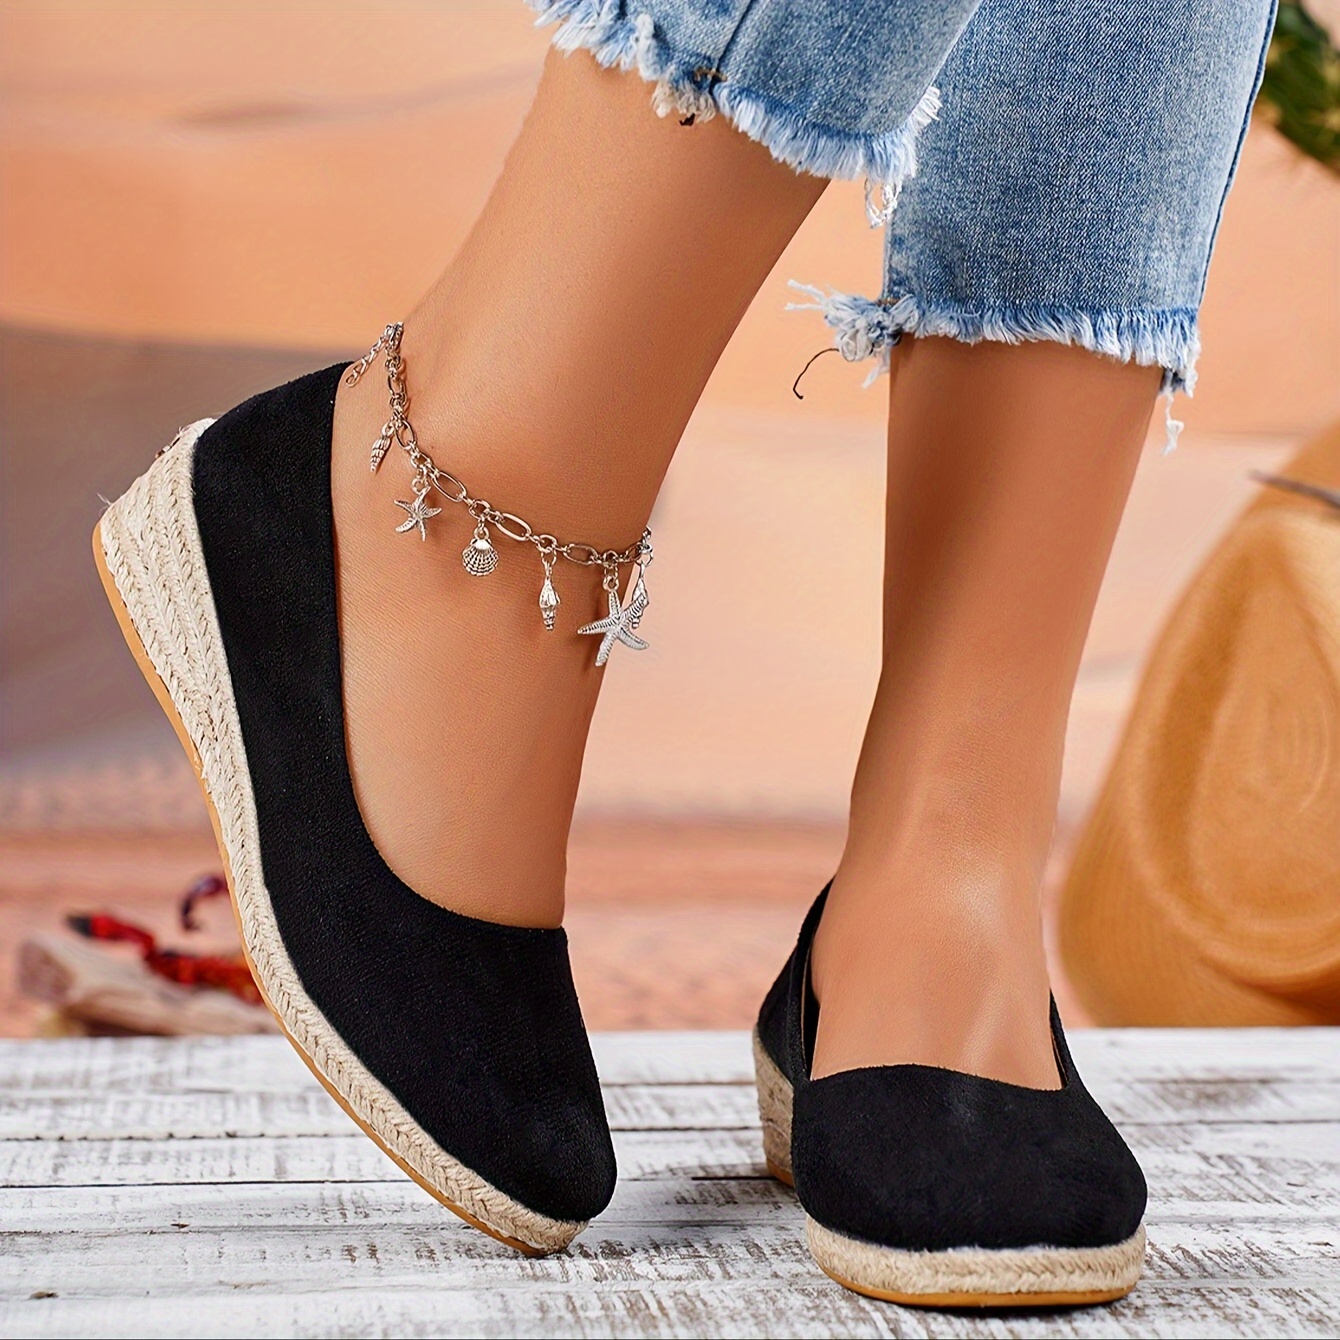 

Women's Solid Color Casual Shoes, Slip On Soft Sole Comfy Shallow Mouth Shoes, Espadrilles Wedge Lightweight Shoes